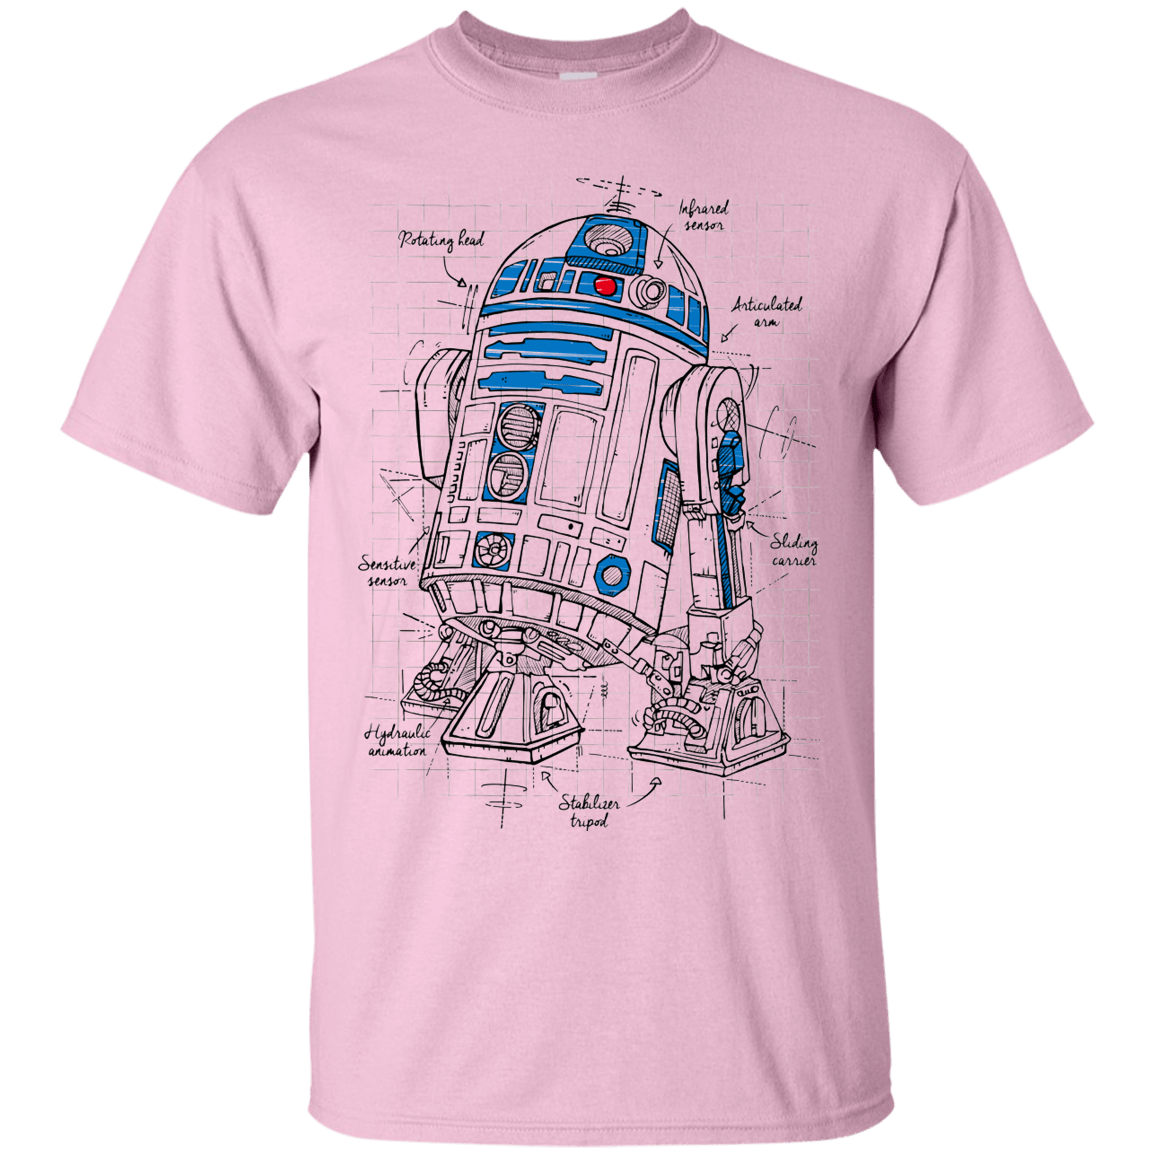 Star Wars Darth Vader Who's Your Daddy? Juniors Girly Shirt, 4X